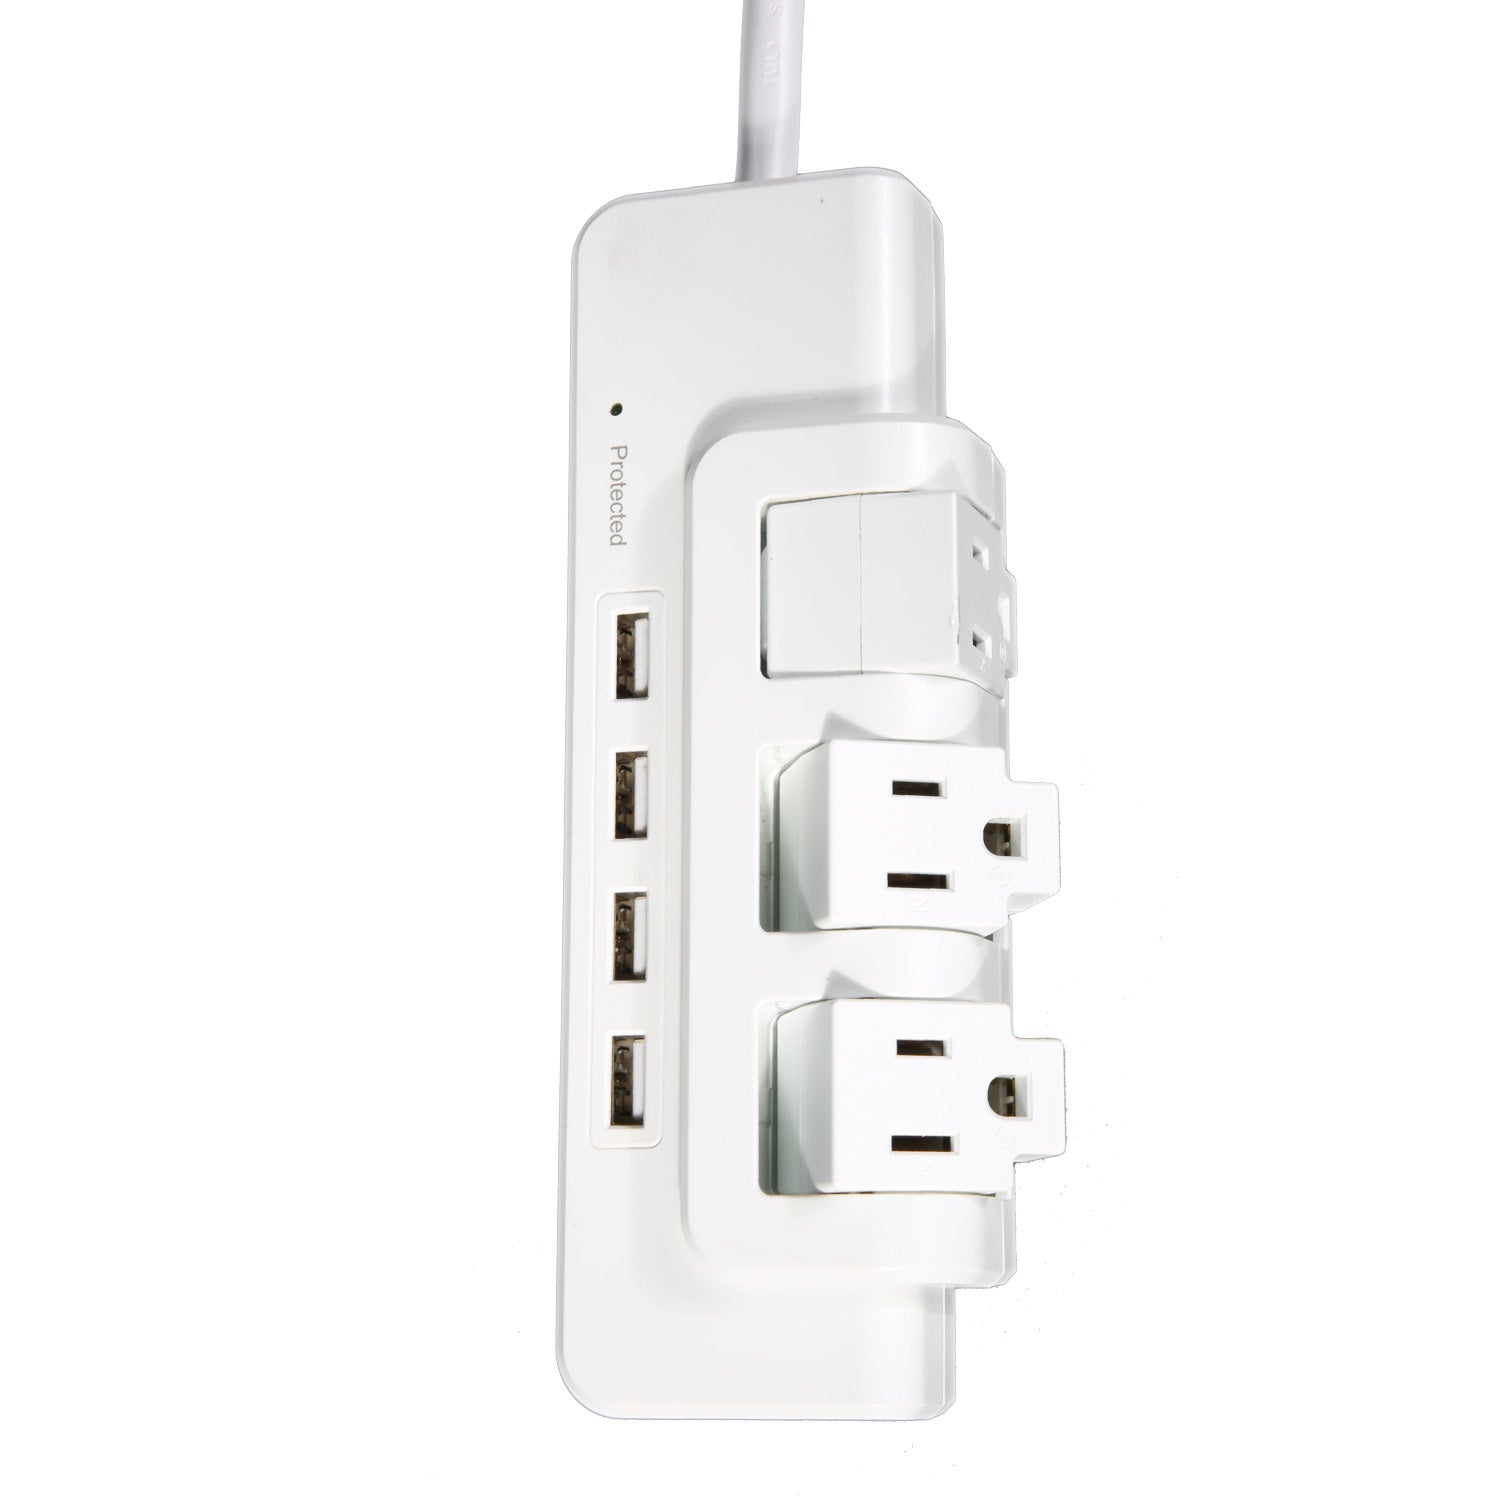 3 Outlet 4 USB Ports Rotating Power Strip with Surge Protector Wall Mount for Home Office